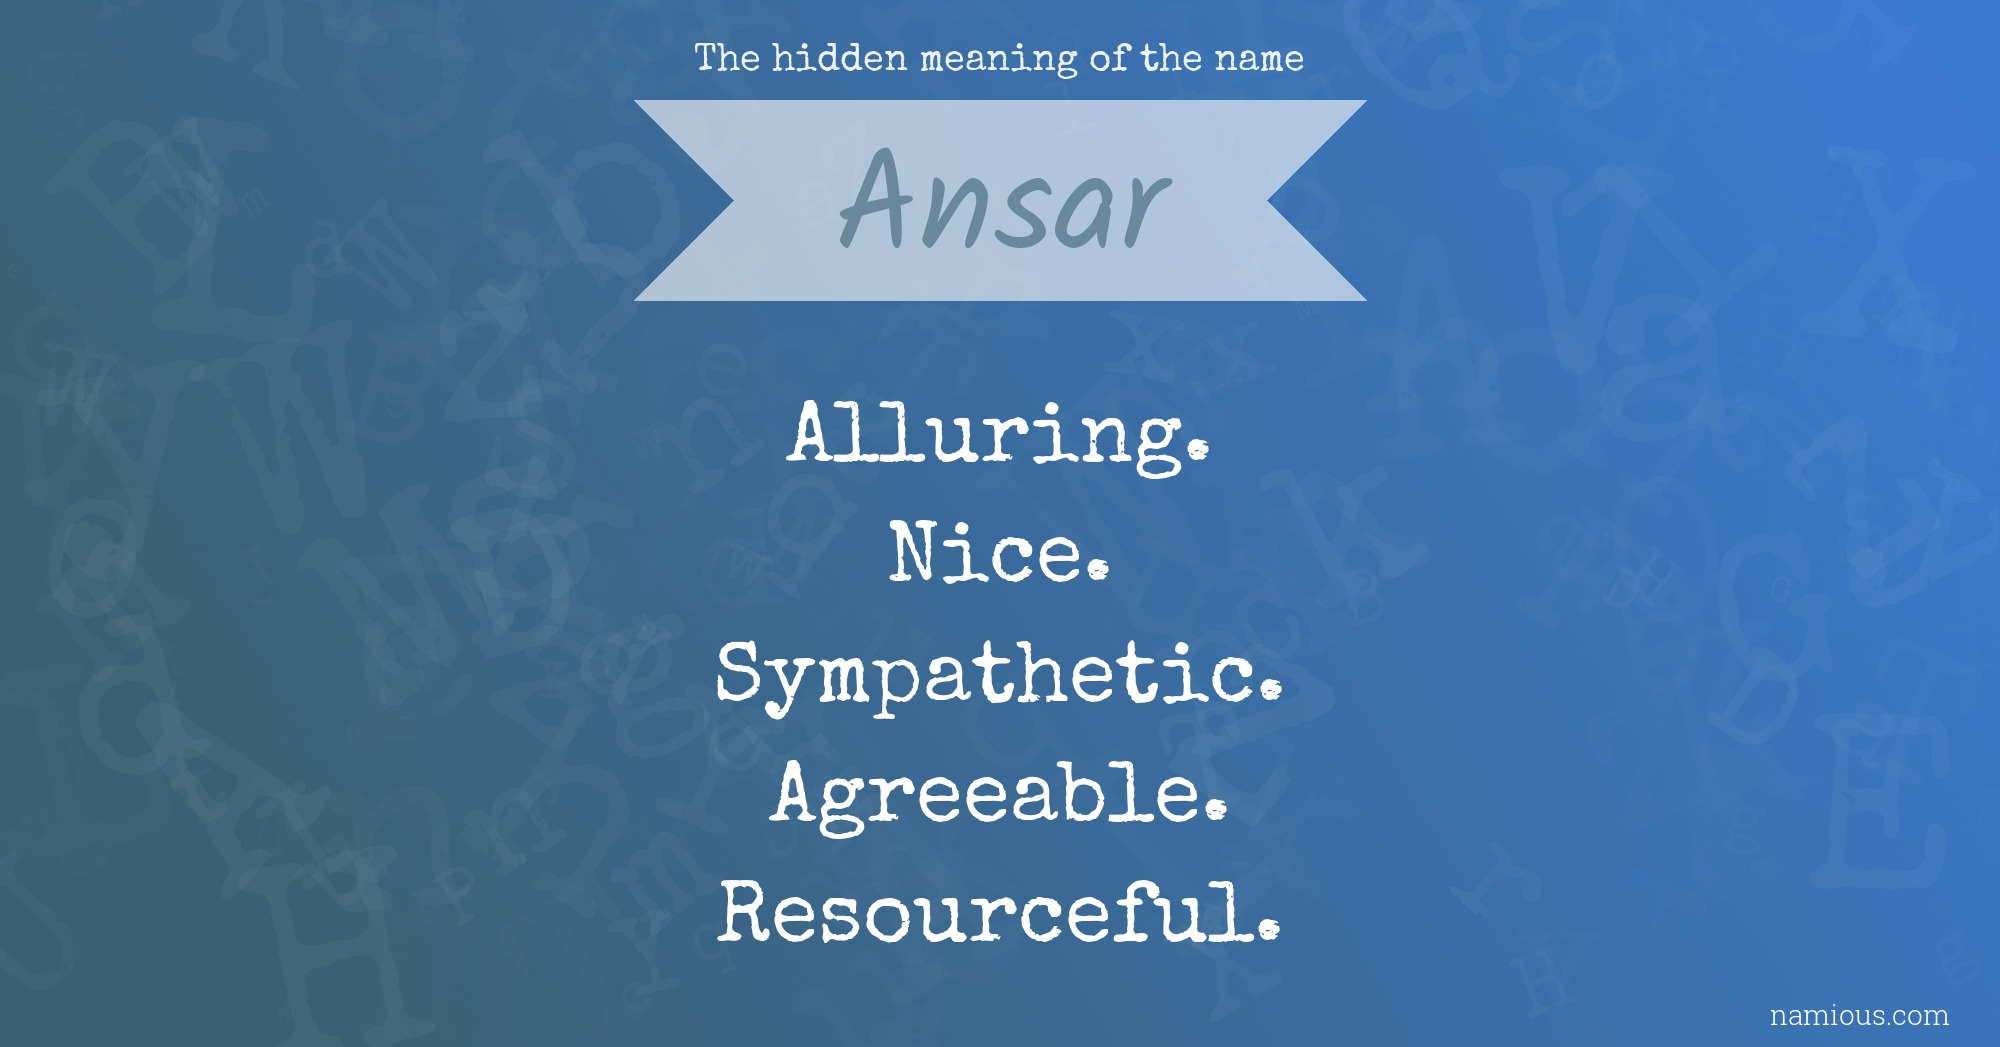 The hidden meaning of the name Ansar